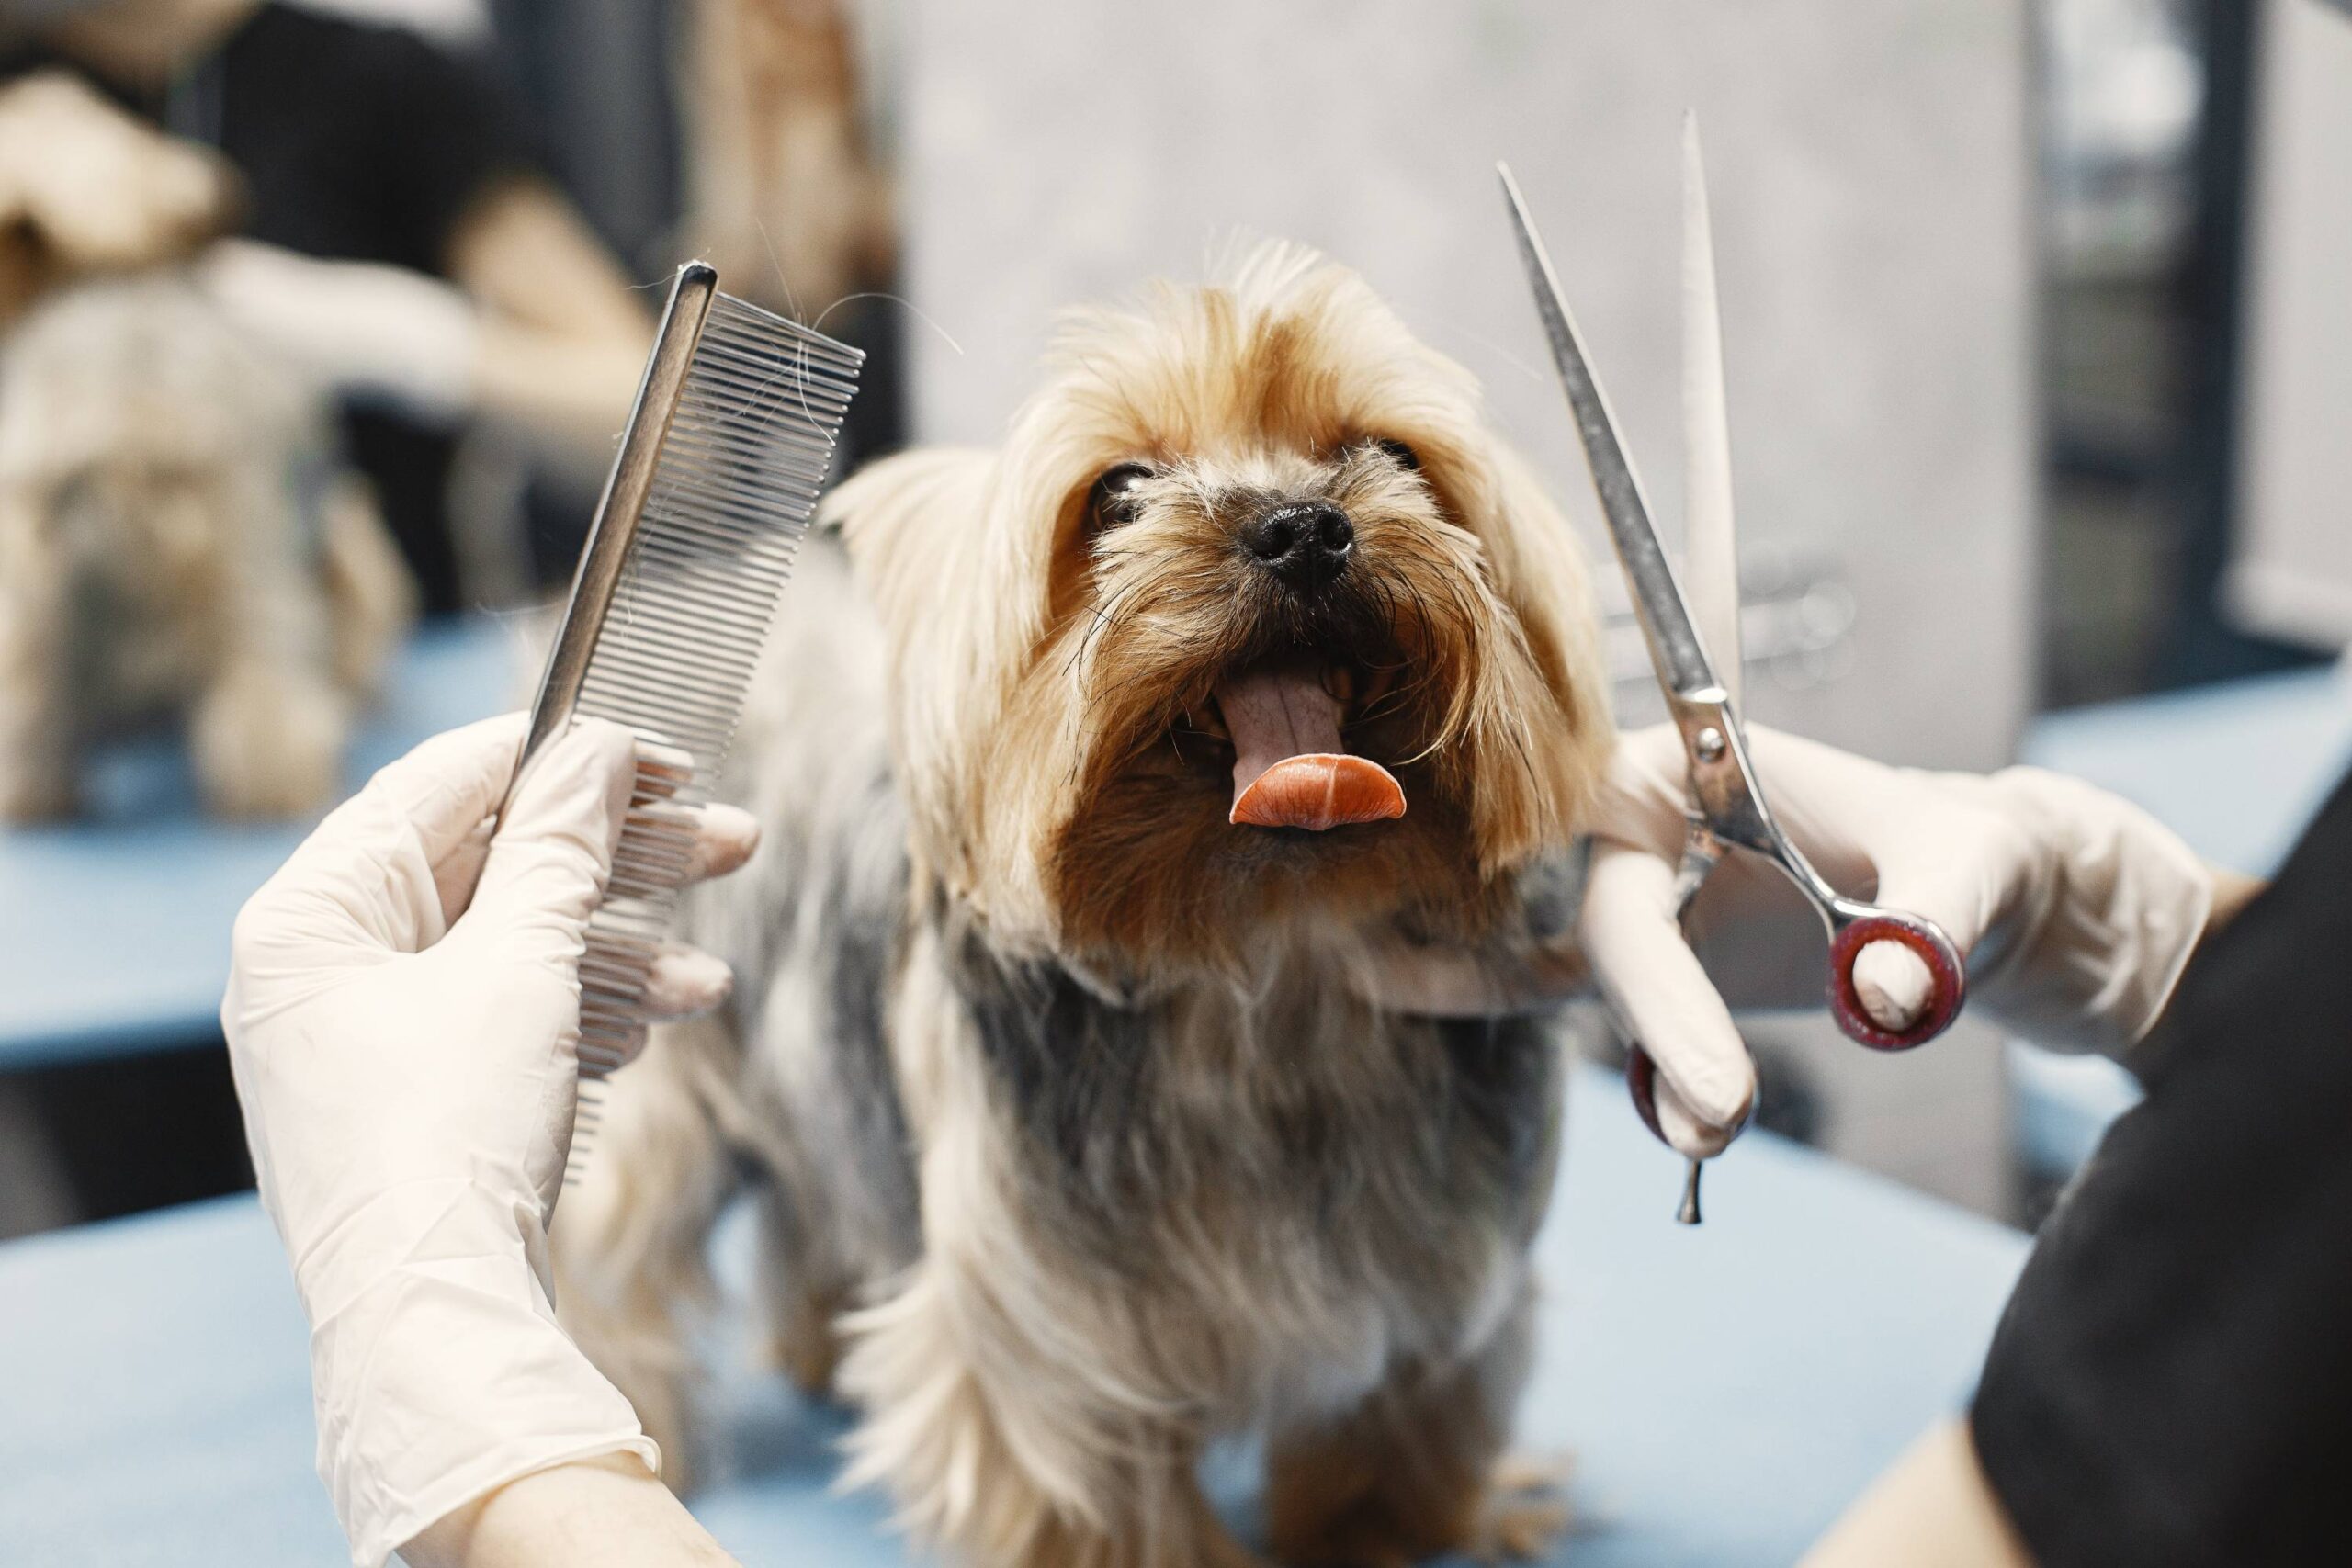 Pet Care and Grooming 101: Essential Tips for a Healthy, Happy Furry Friend